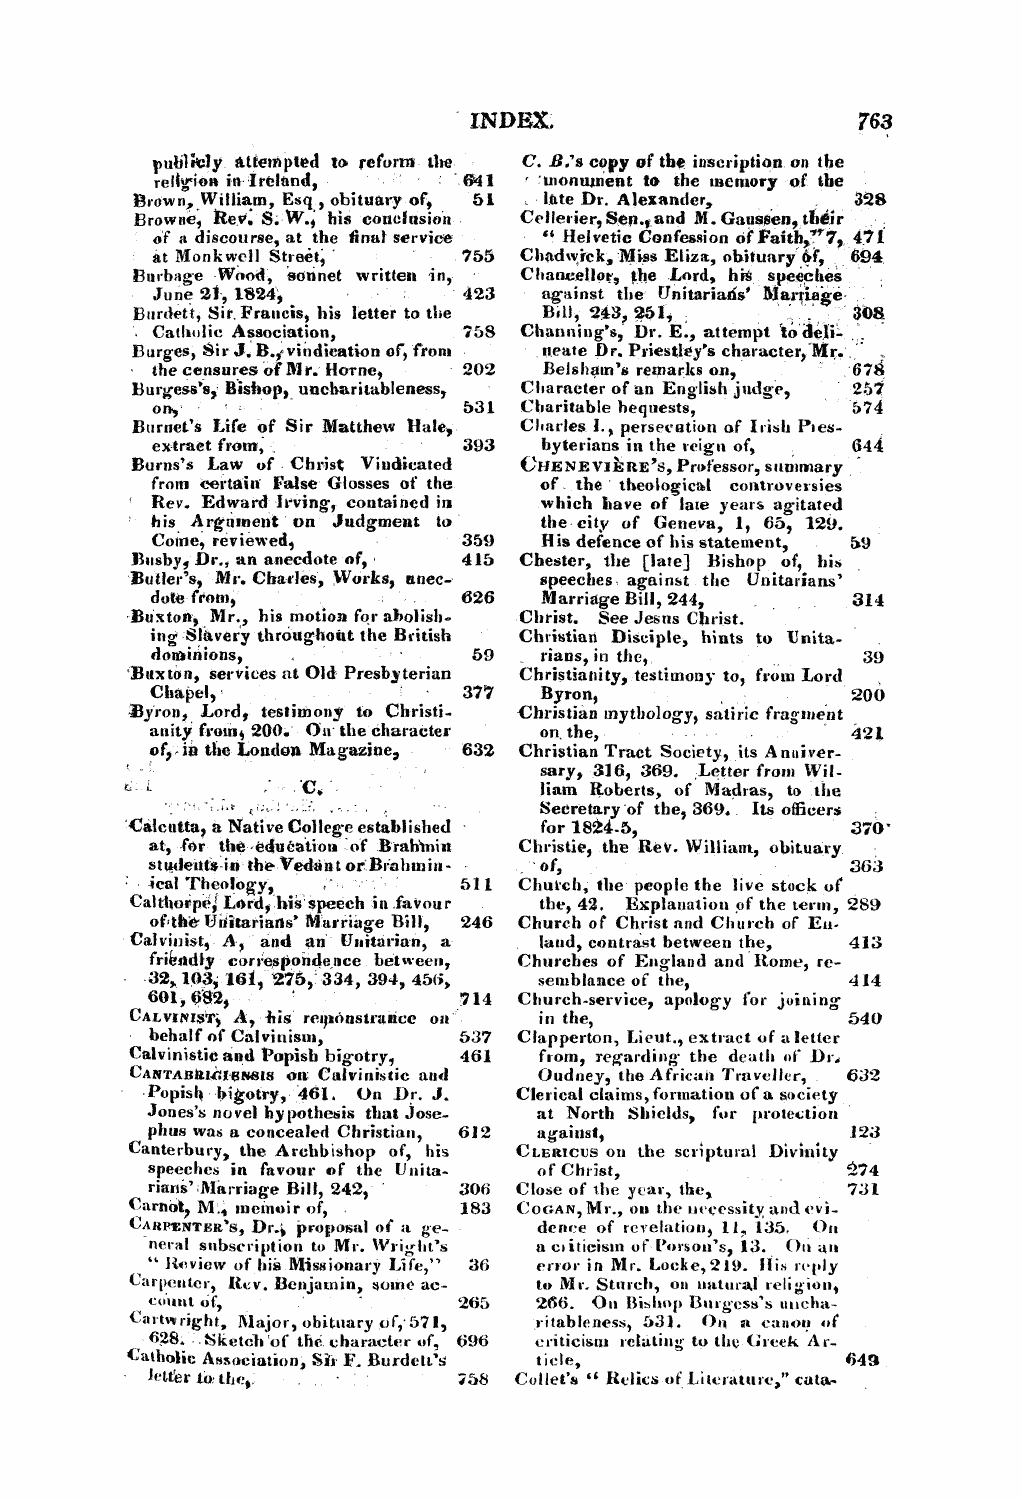 Monthly Repository (1806-1838) and Unitarian Chronicle (1832-1833): F Y, 1st edition, End matter: 3